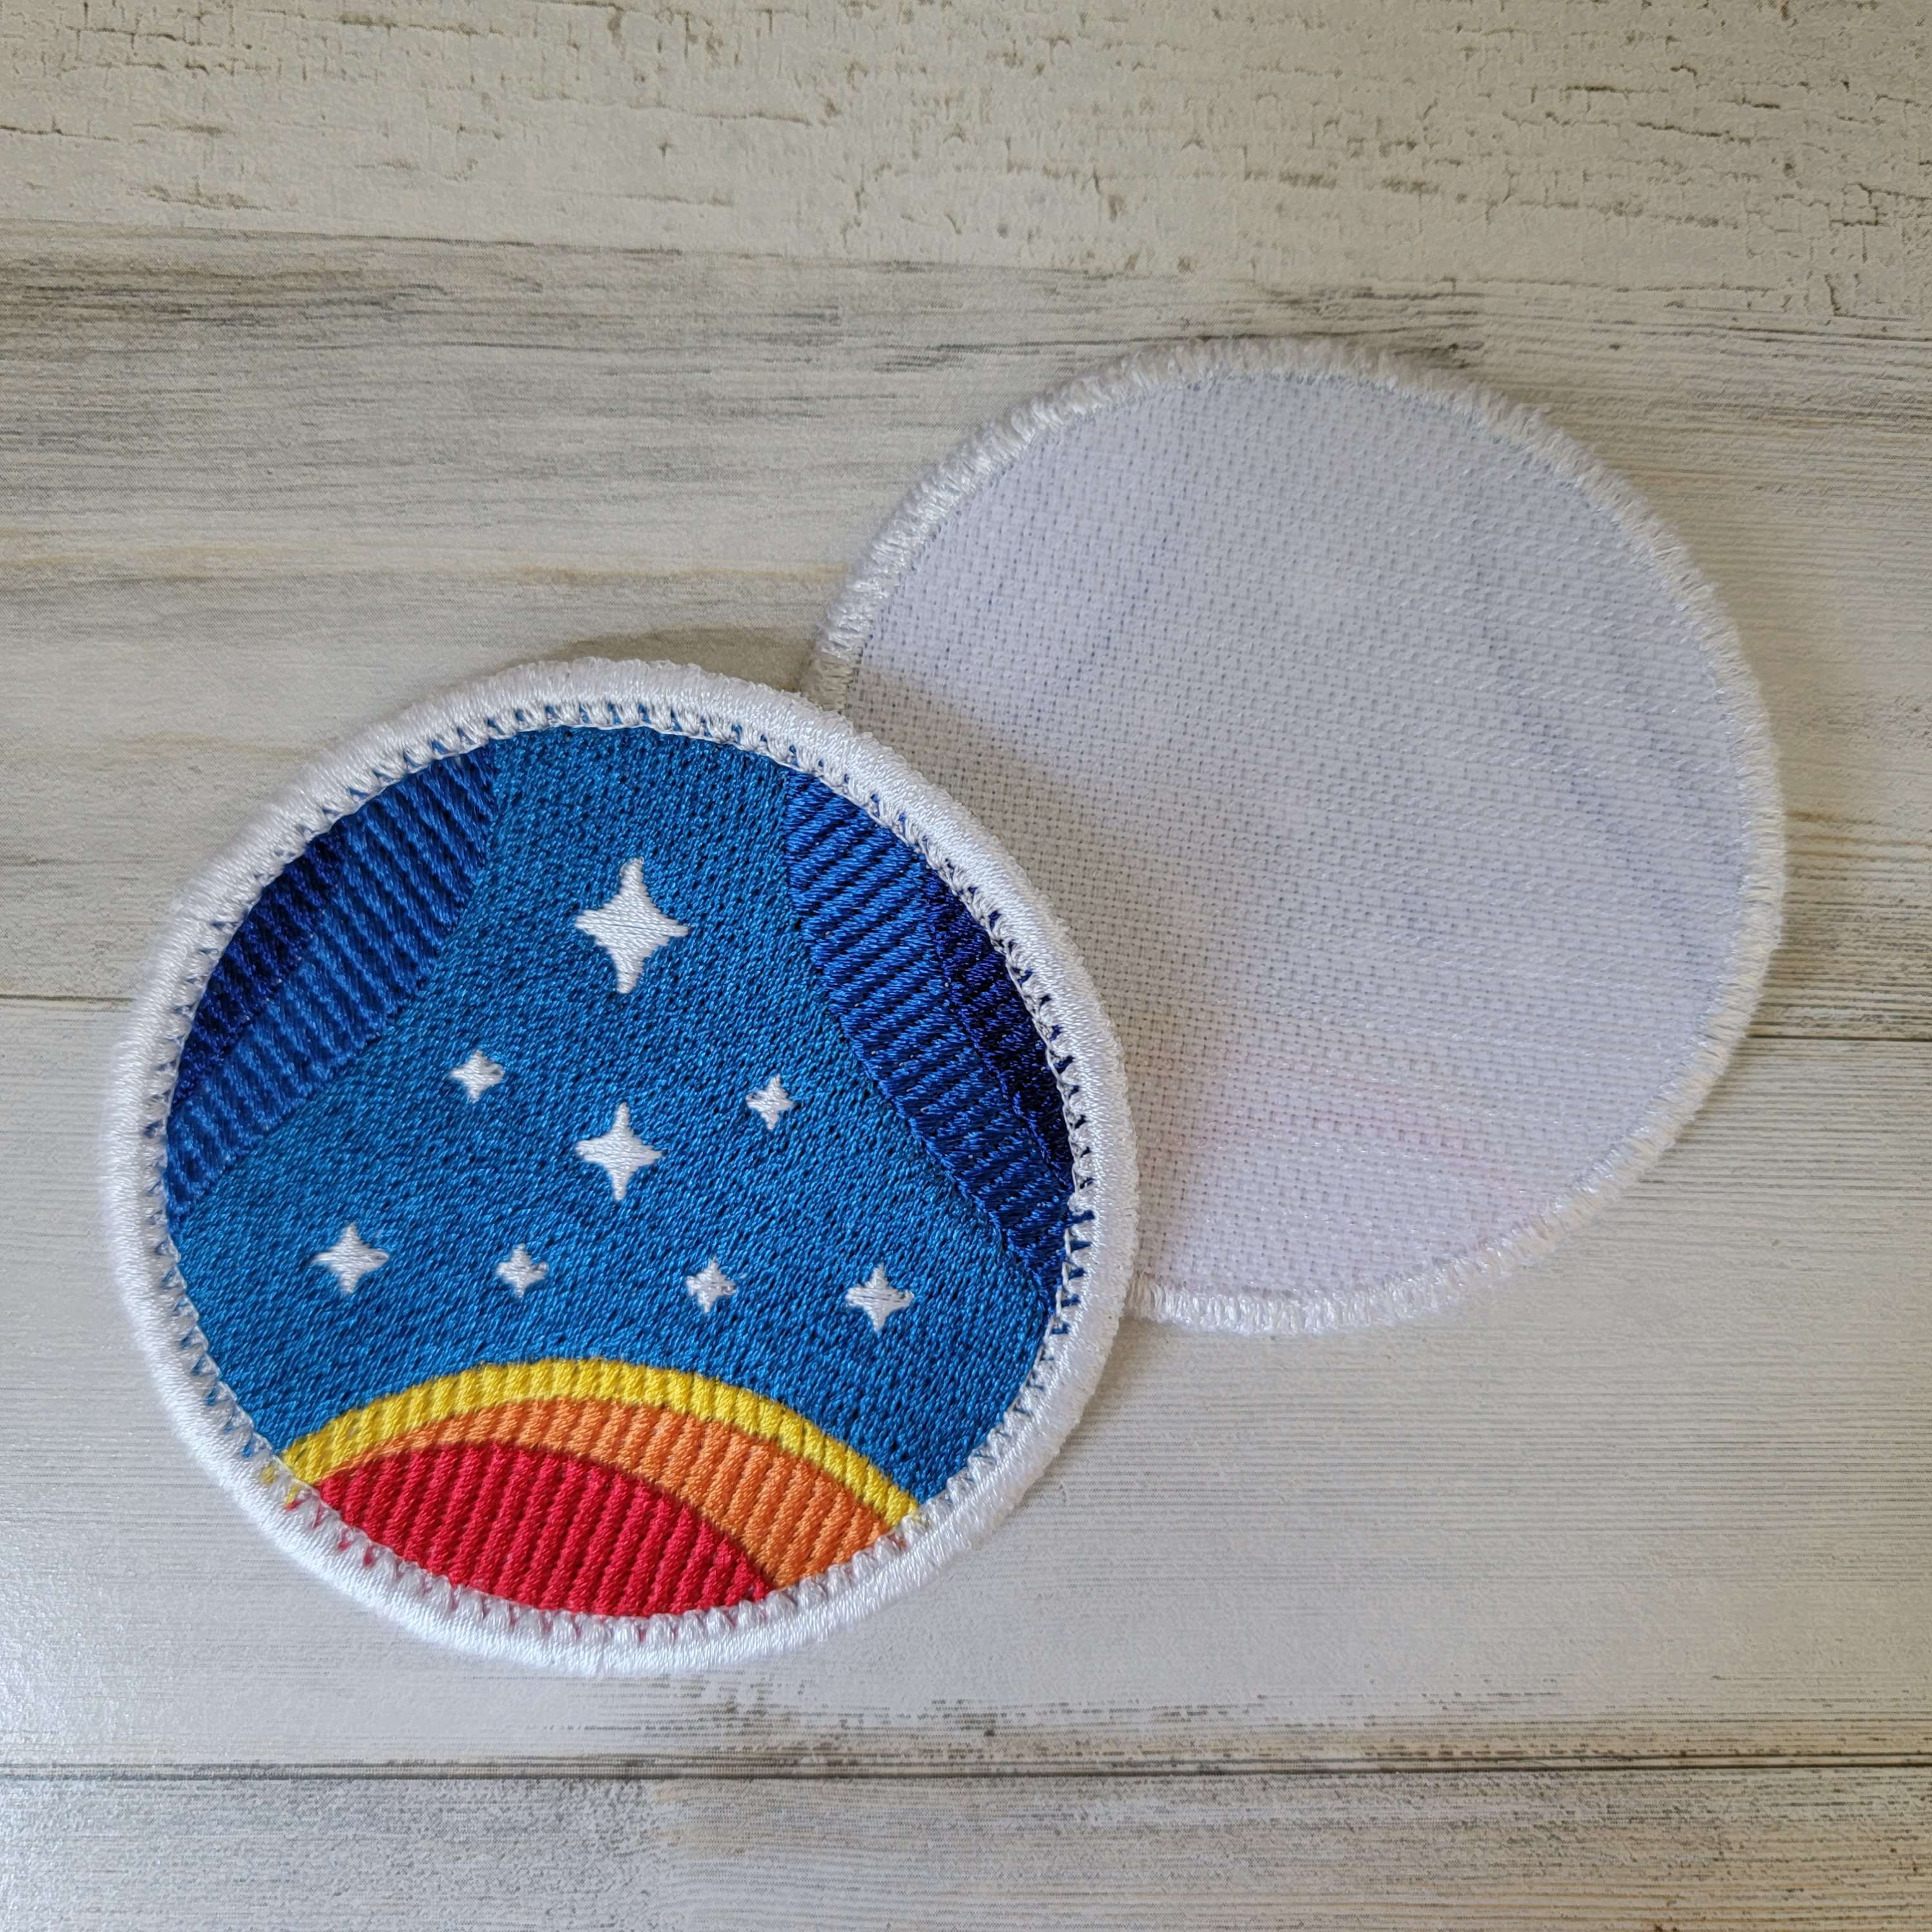 Constellation Logo Embroidered Patch | Starfield Patch – AFK Apparel